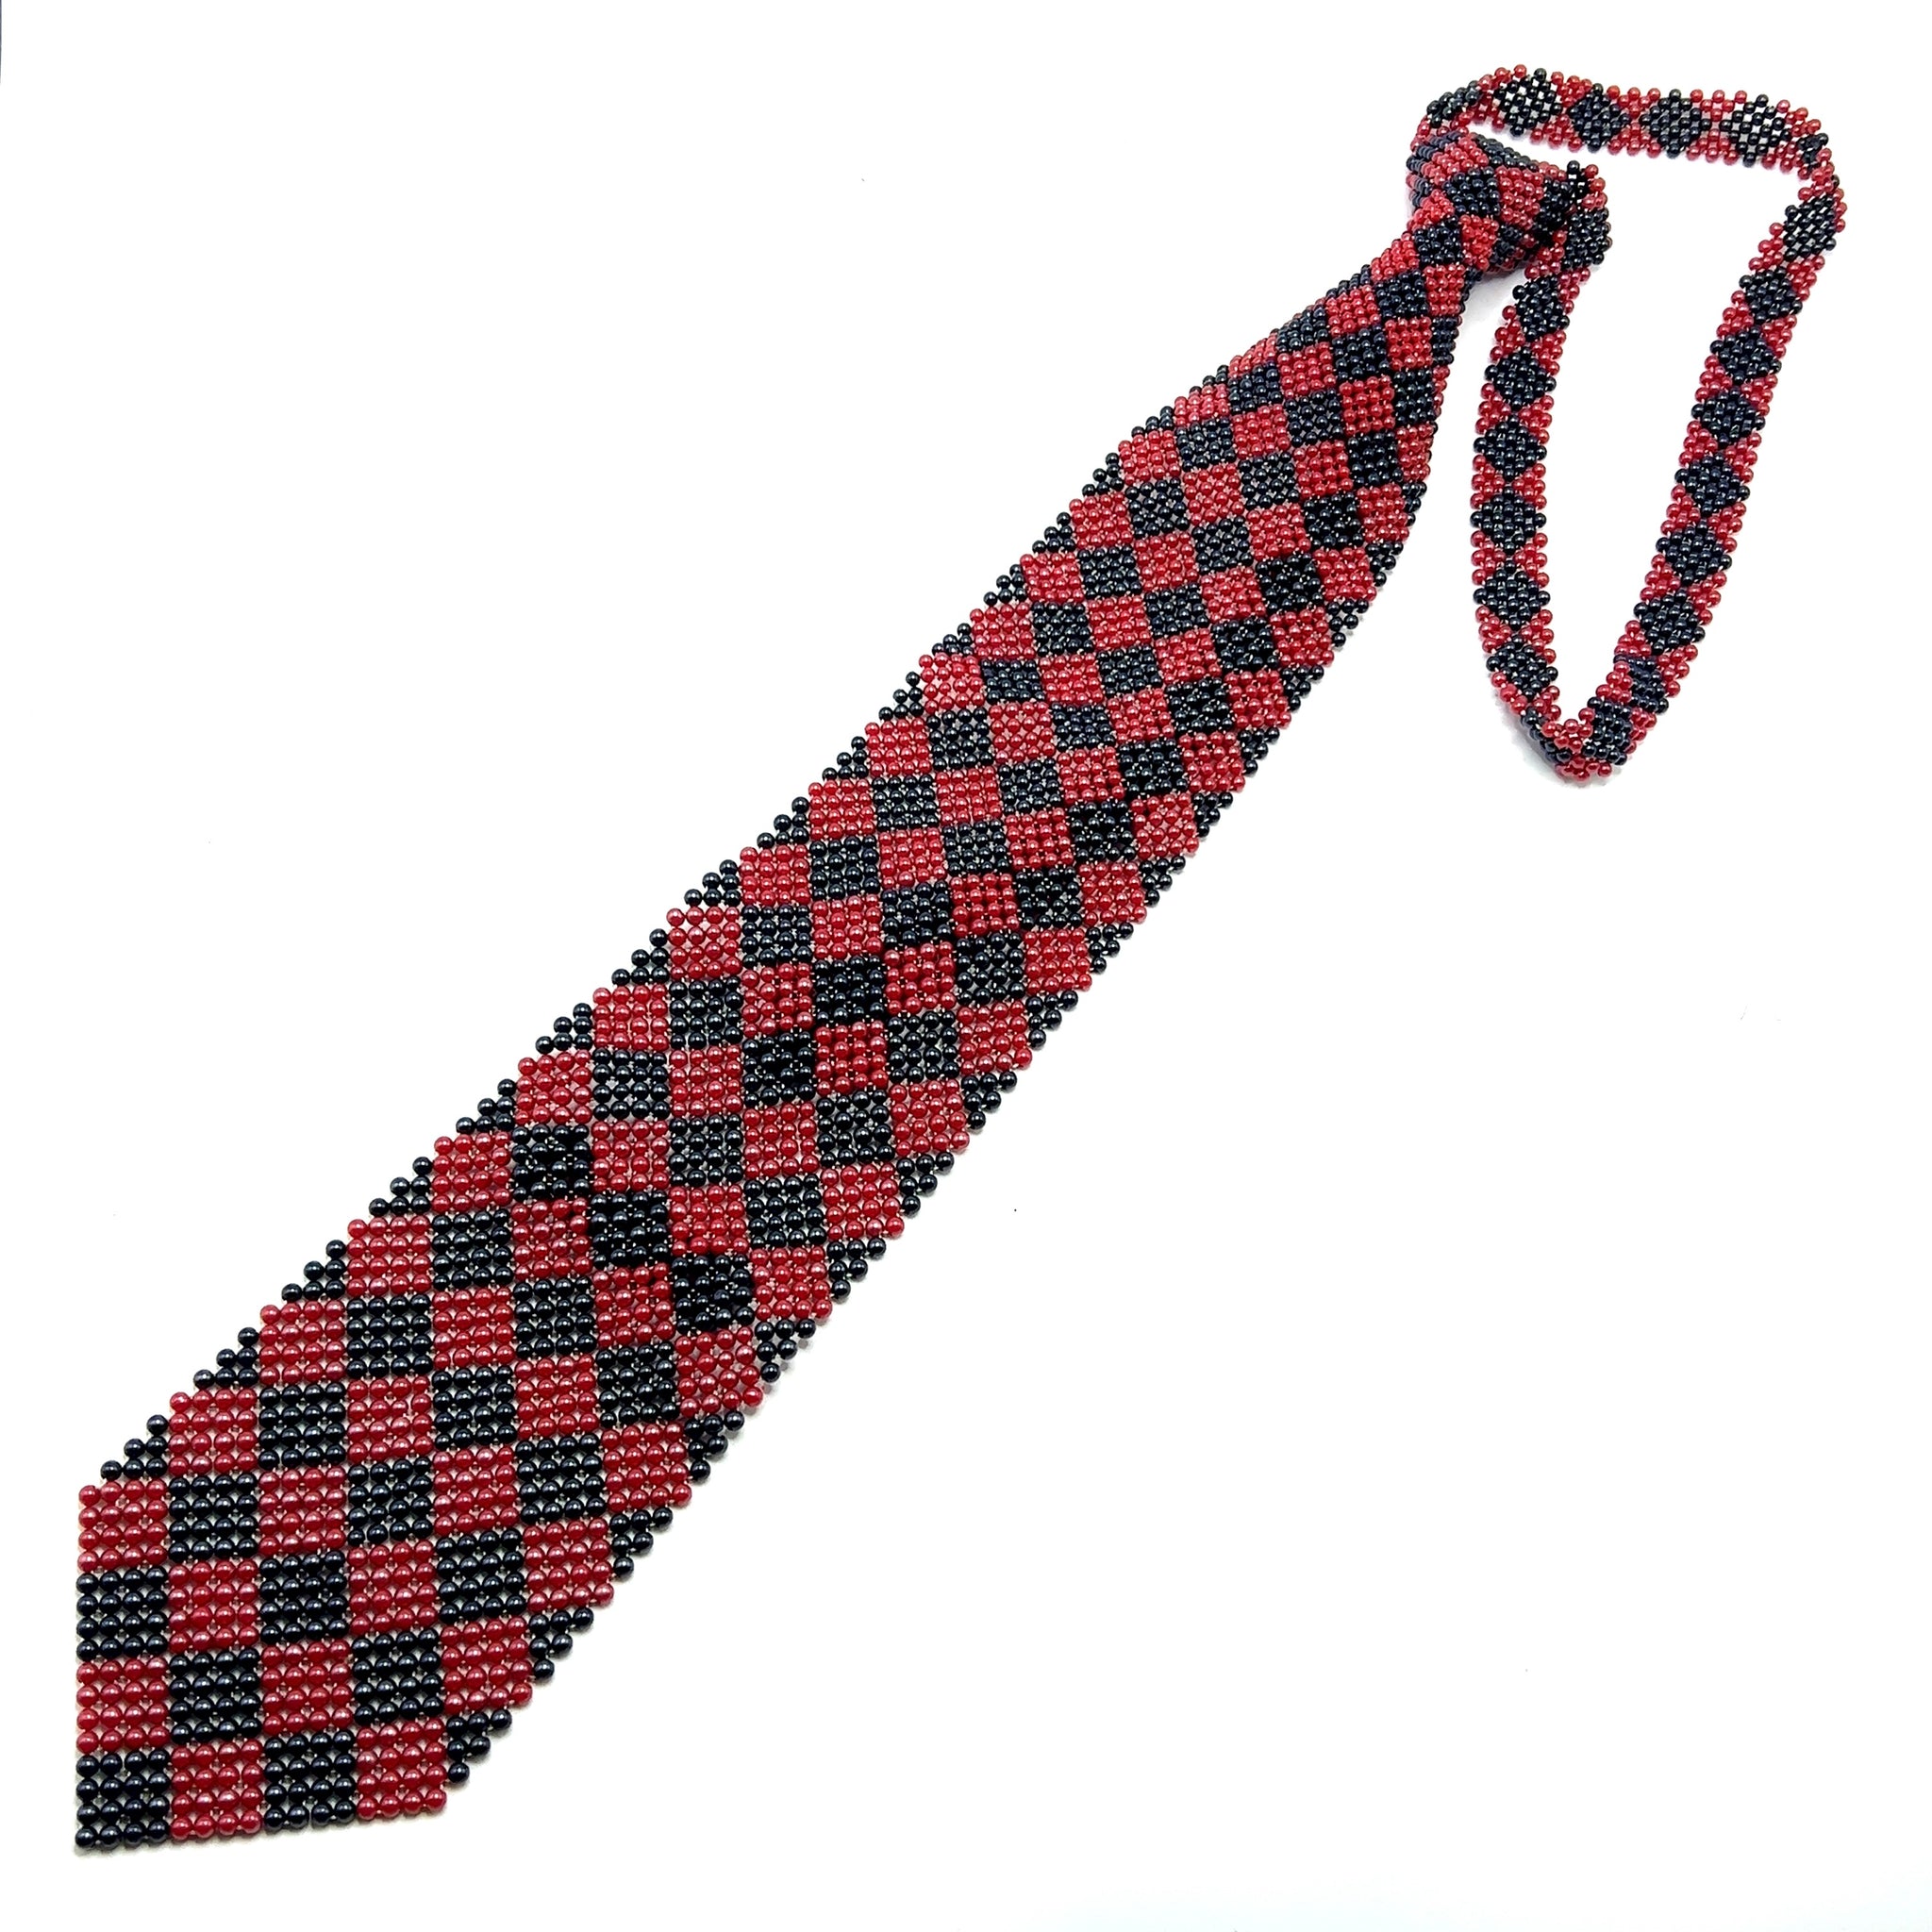 Handcrafted Argyle Pattern Pearl Tie Timeless Unique Collection